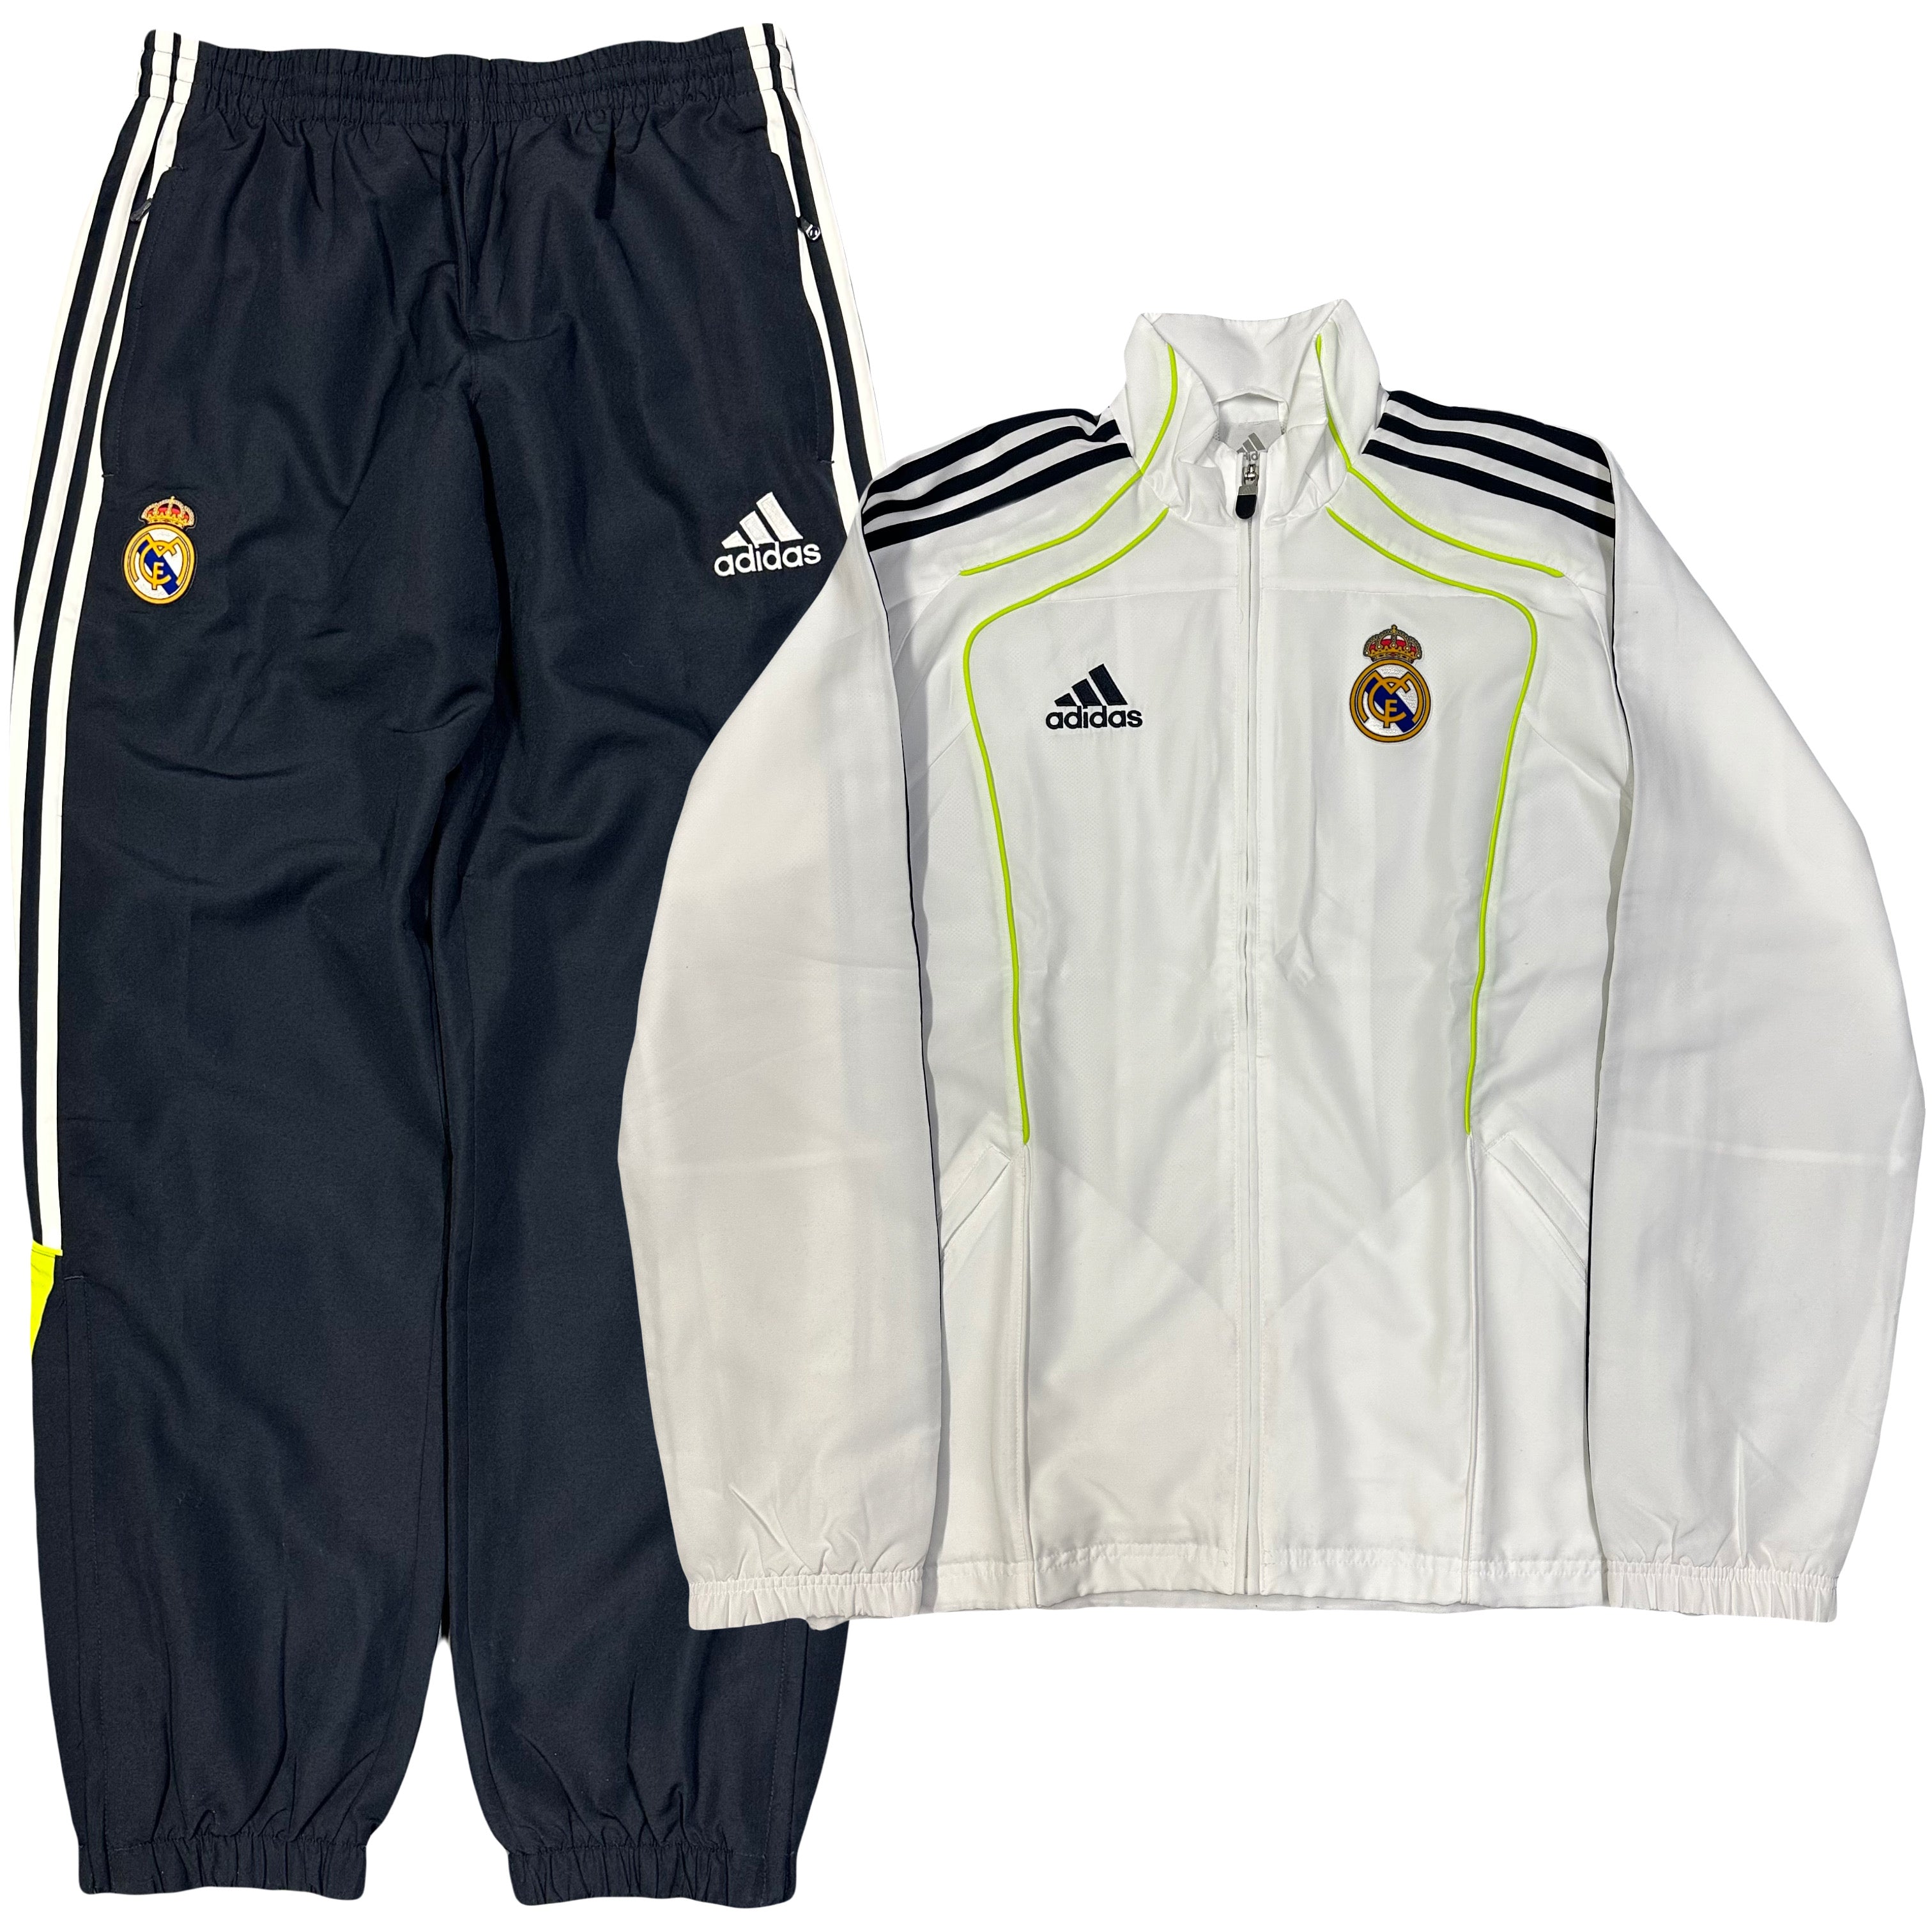 Adidas Real Madrid 2010/11 Tracksuit In White & Black ( M )